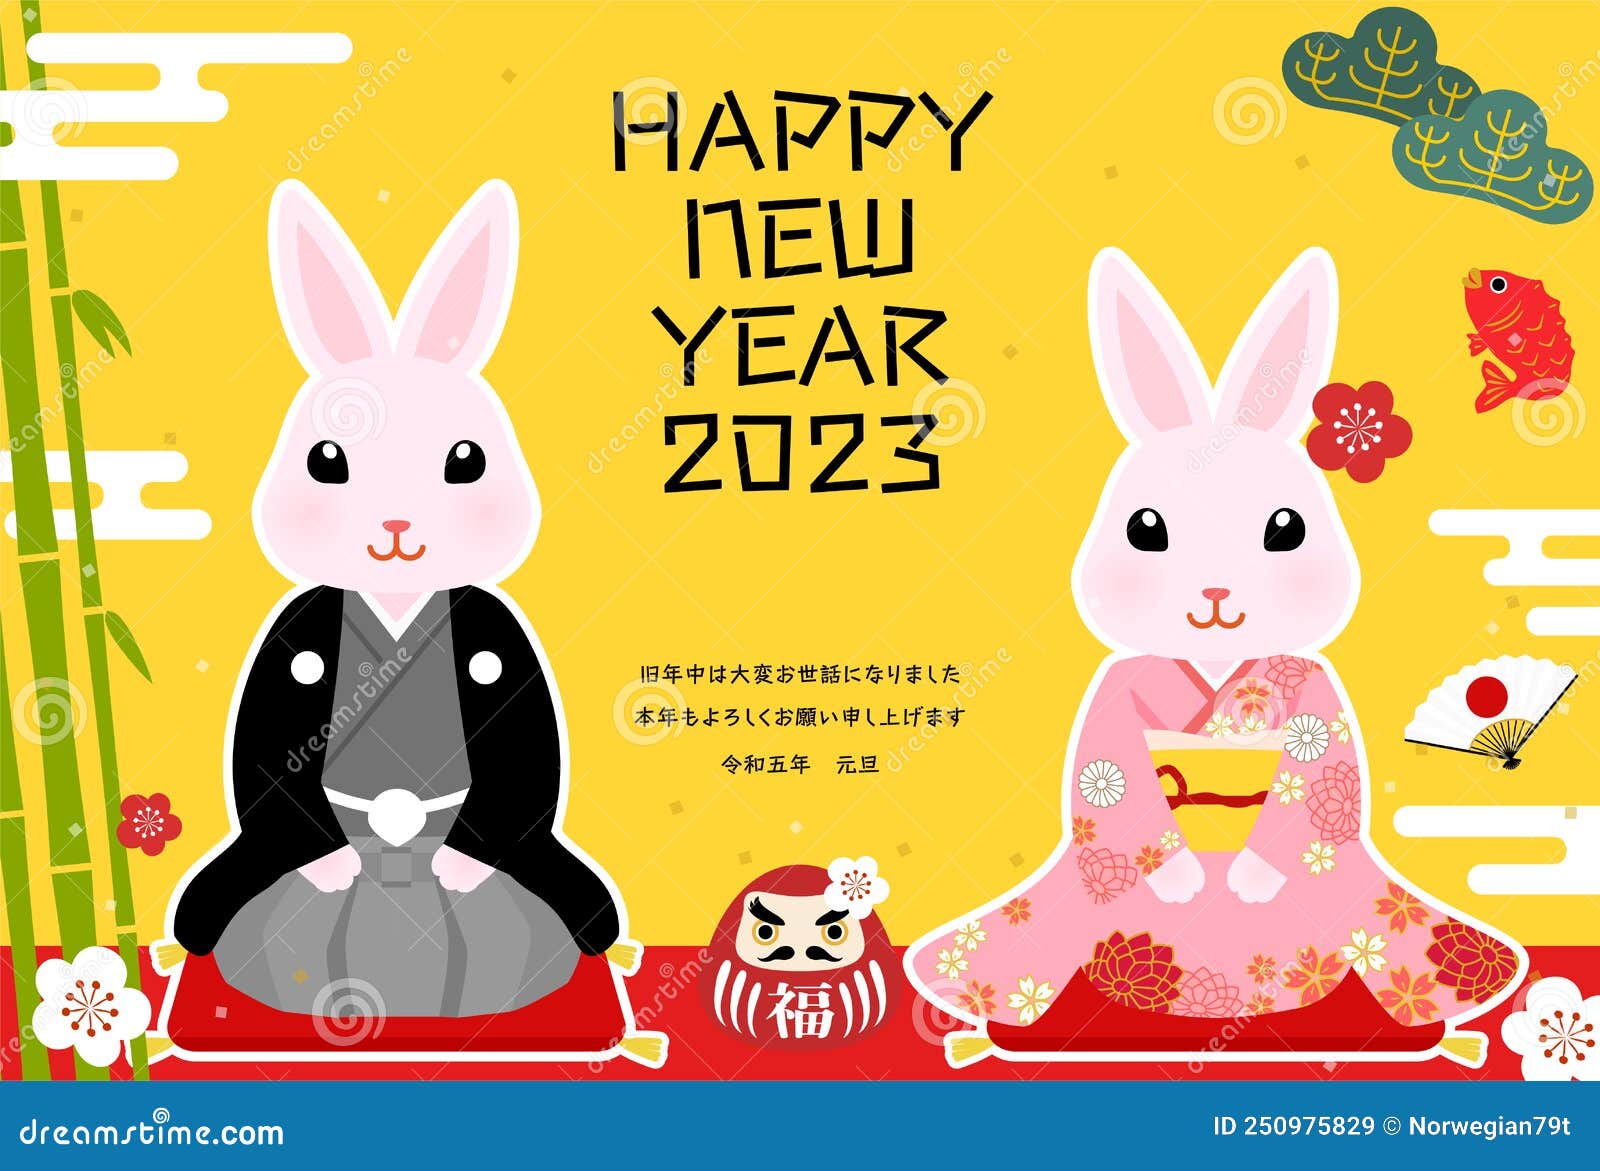 Year of the Rabbit Card, Lunar New Year